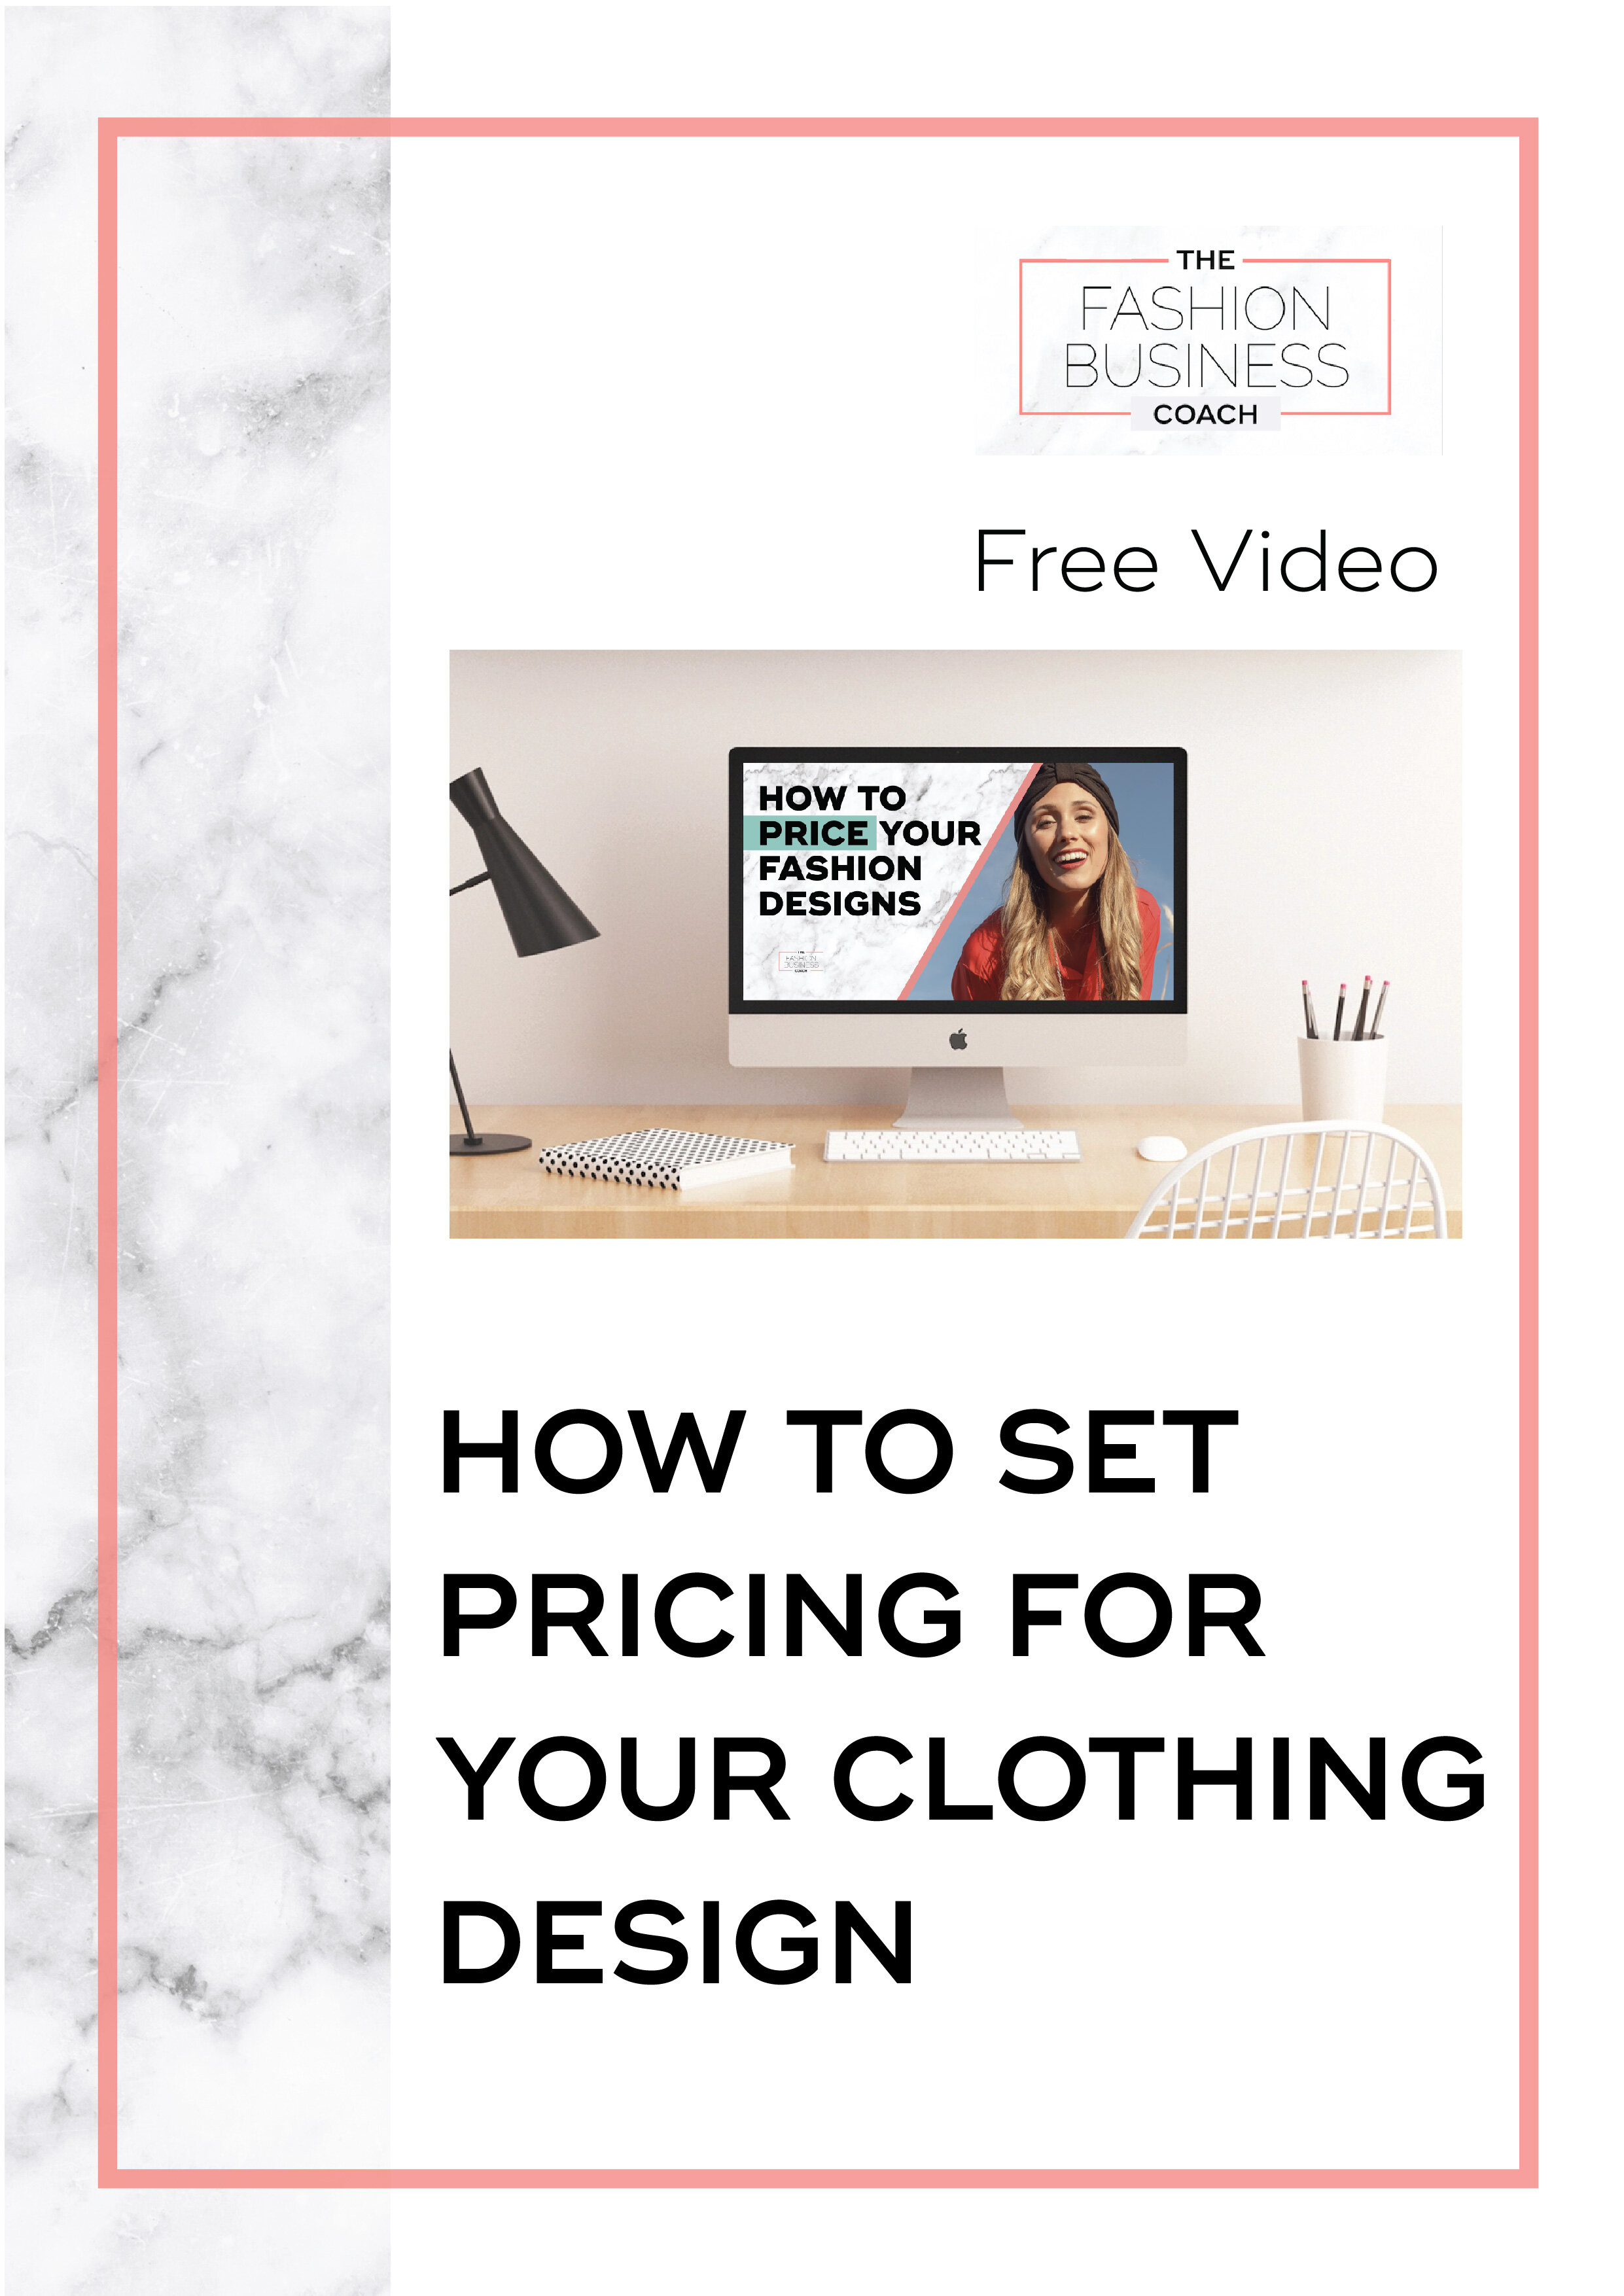 How to Set Pricing for Your Clothing Design2.jpg